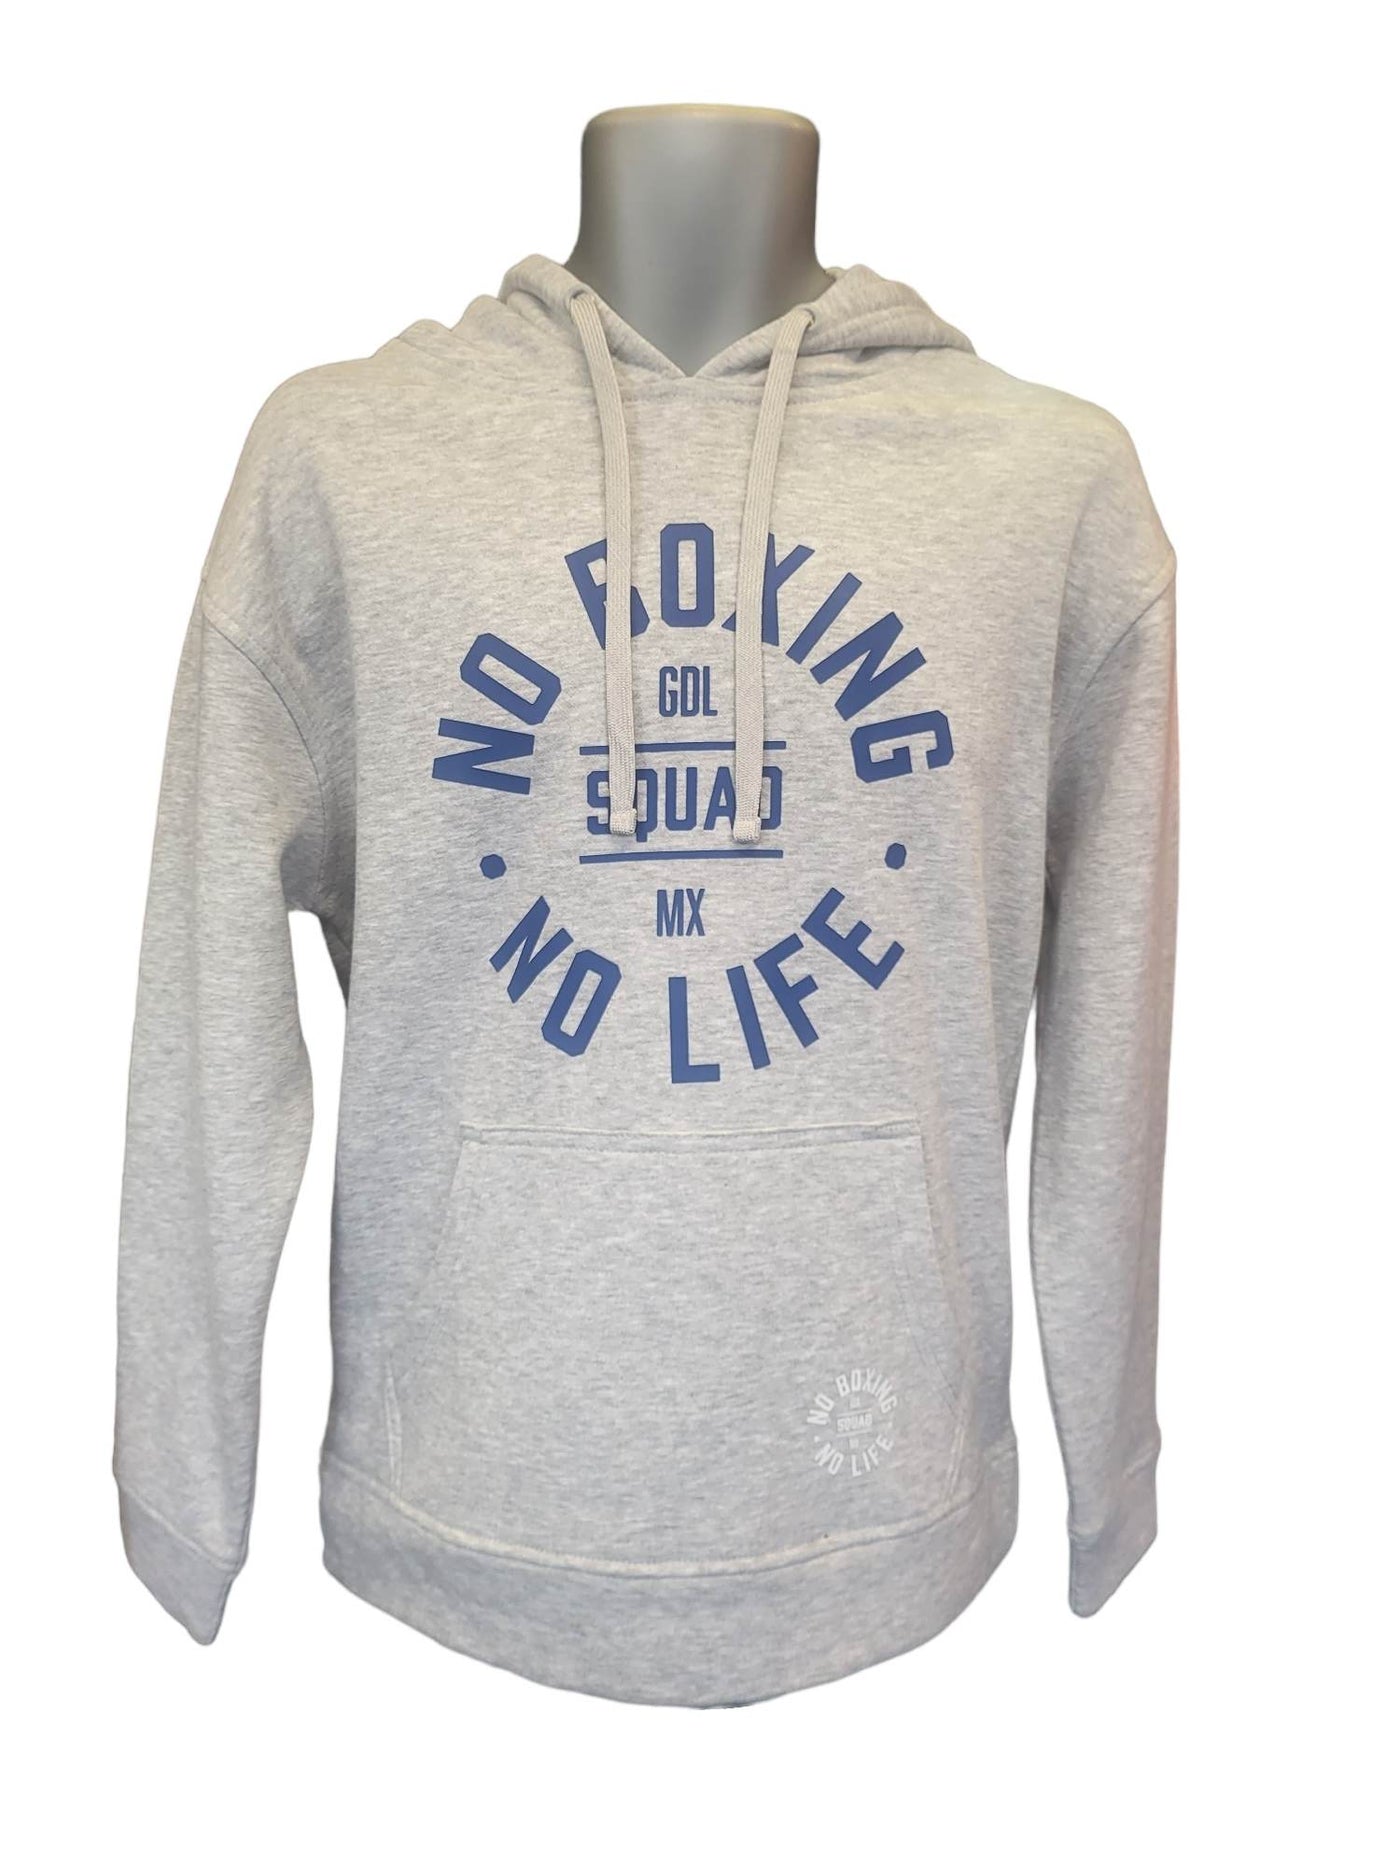 Official No Boxing No Life GDL MX SQUAD Hoodie - Grey/ Blue